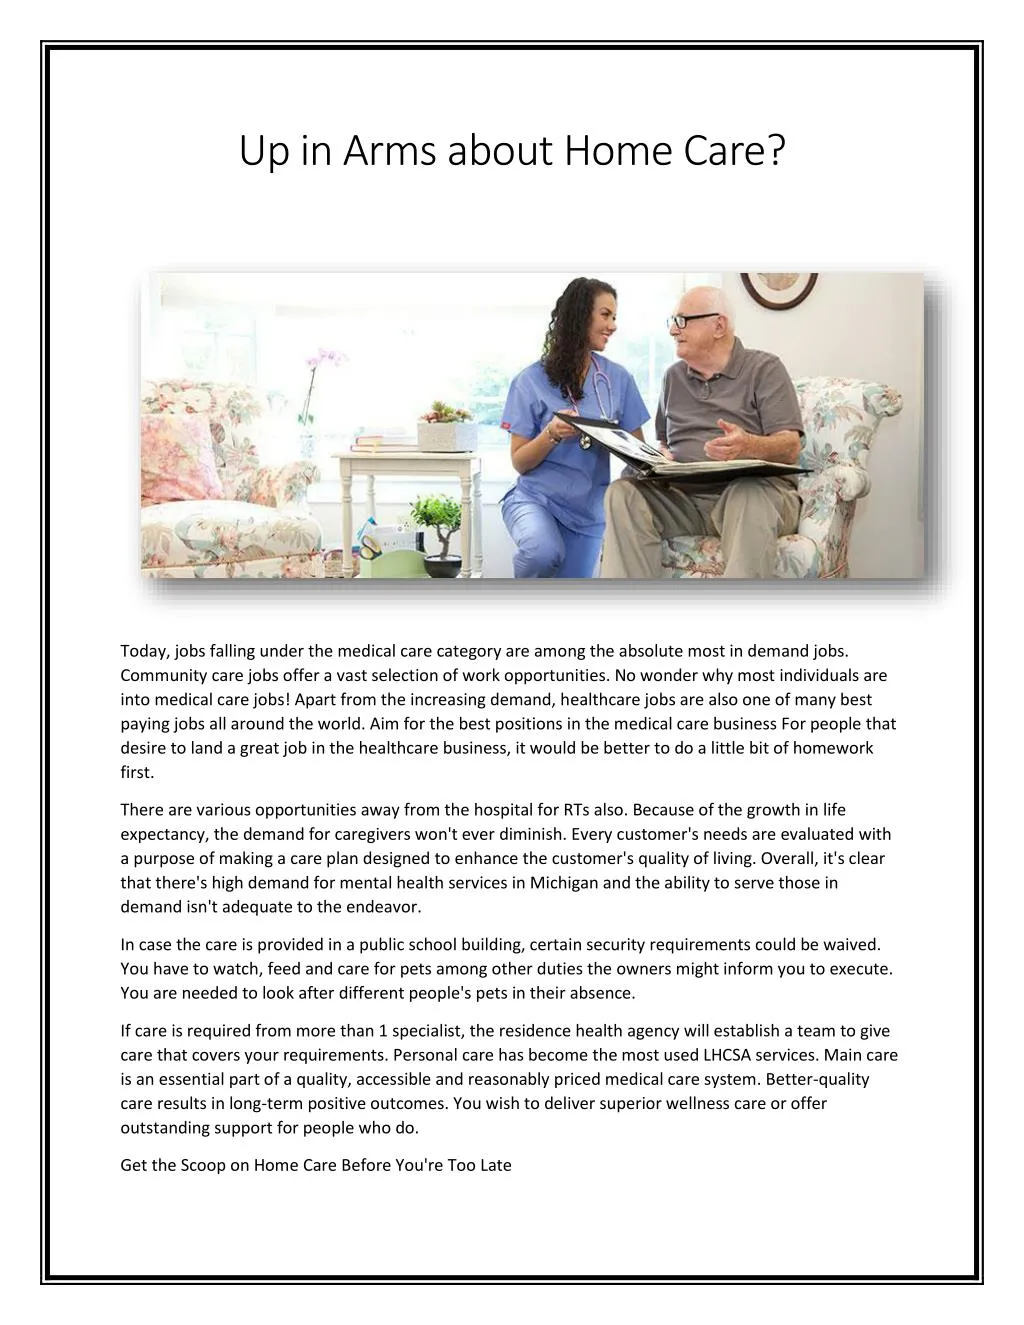 up in arms about home care